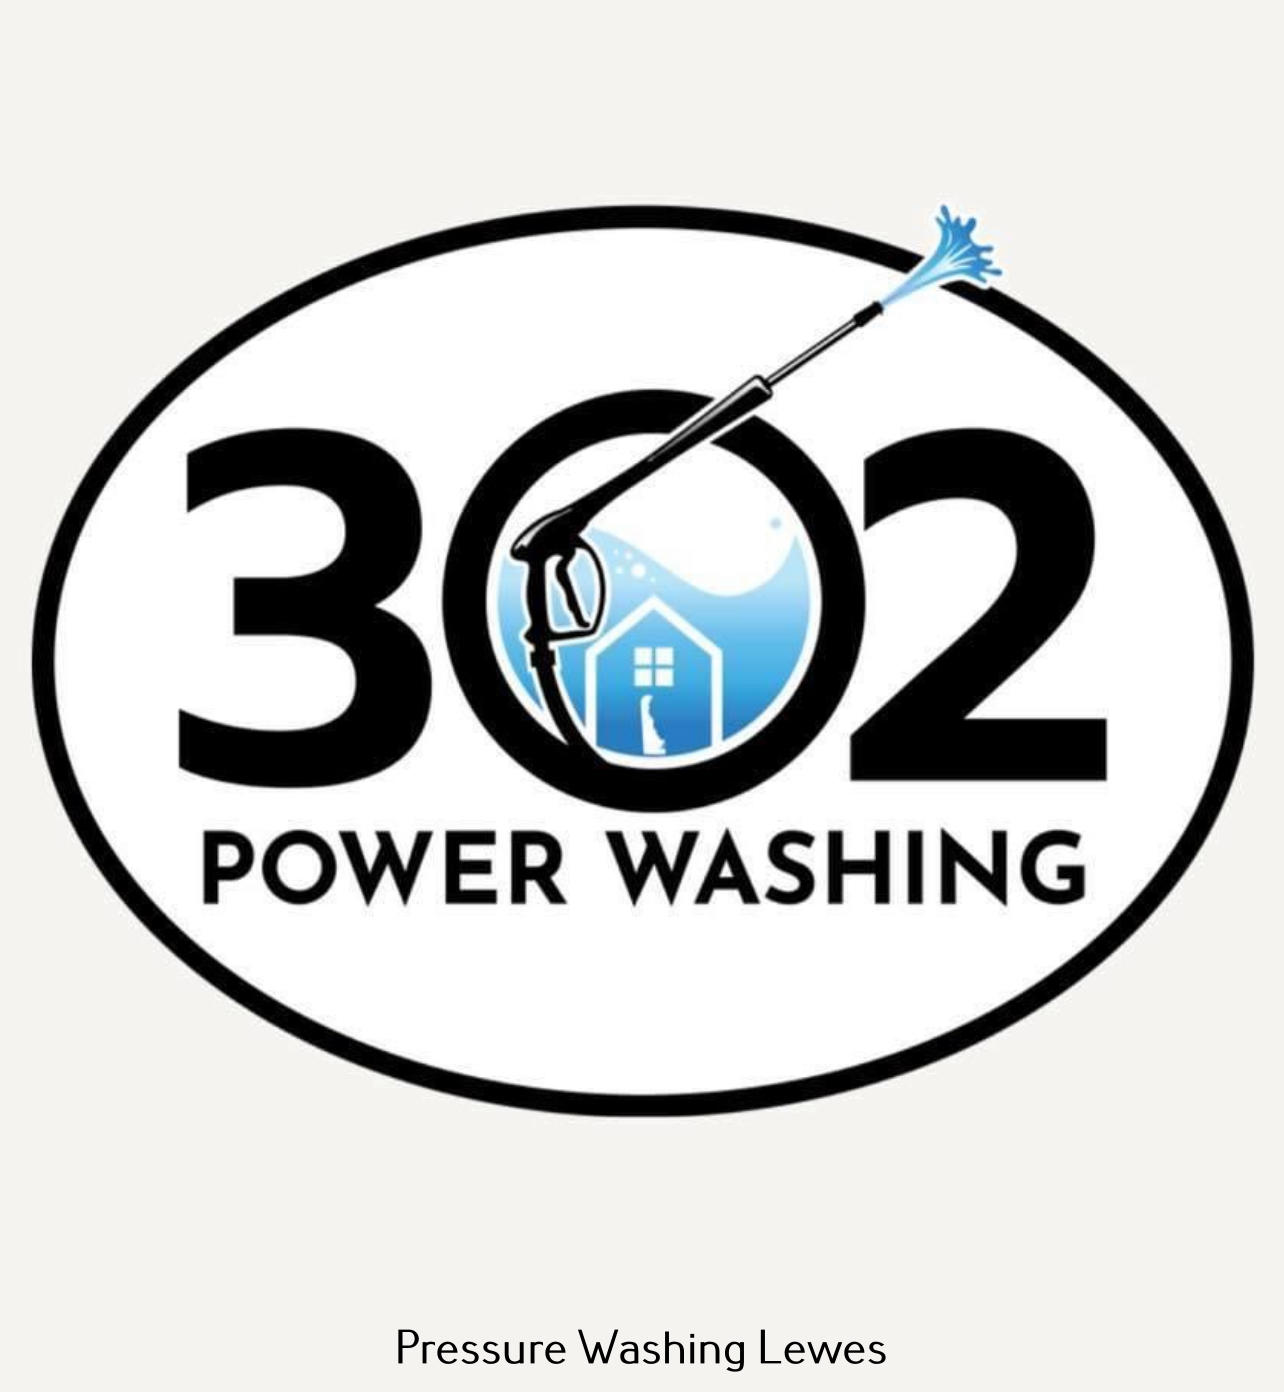 302 Power Washing Explains the Differences Between Power Washing and Pressure Washing